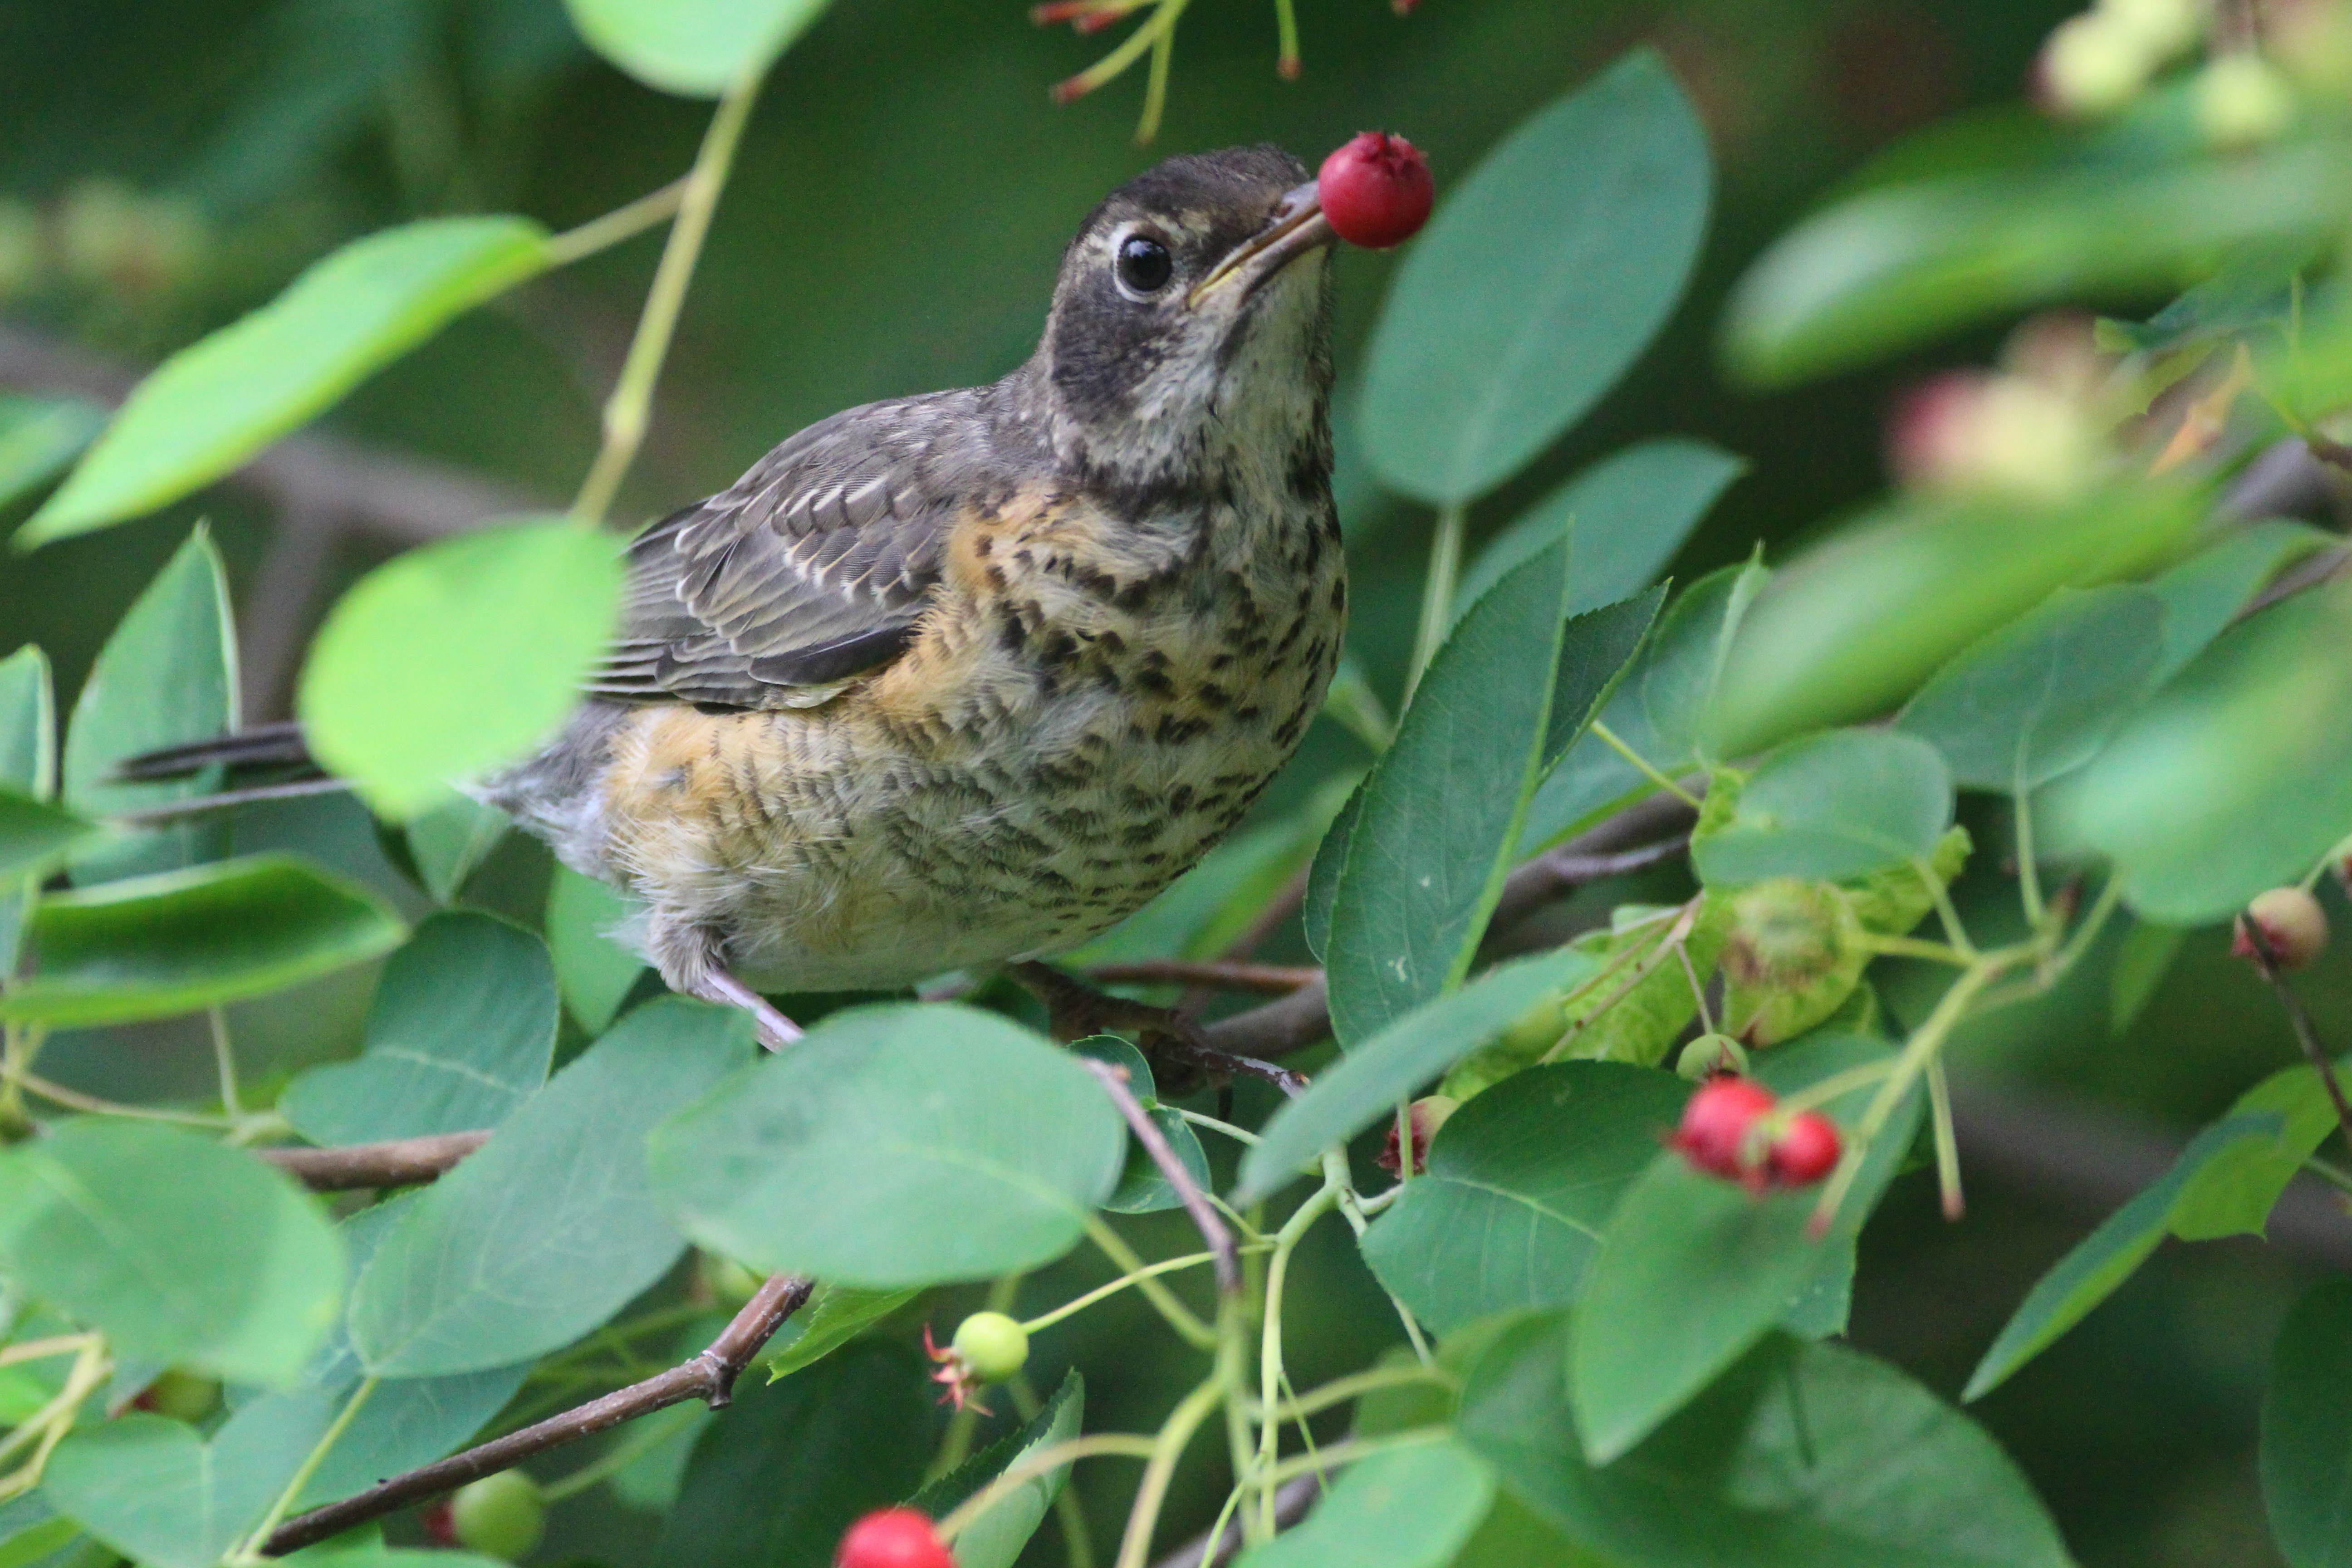 A young American Robin feeds on Shadbush berries. Photo: <a href=\"https://www.flickr.com/photos/89780664@N05/\" target=\"_blank\">Dave Ostapiuk</a>